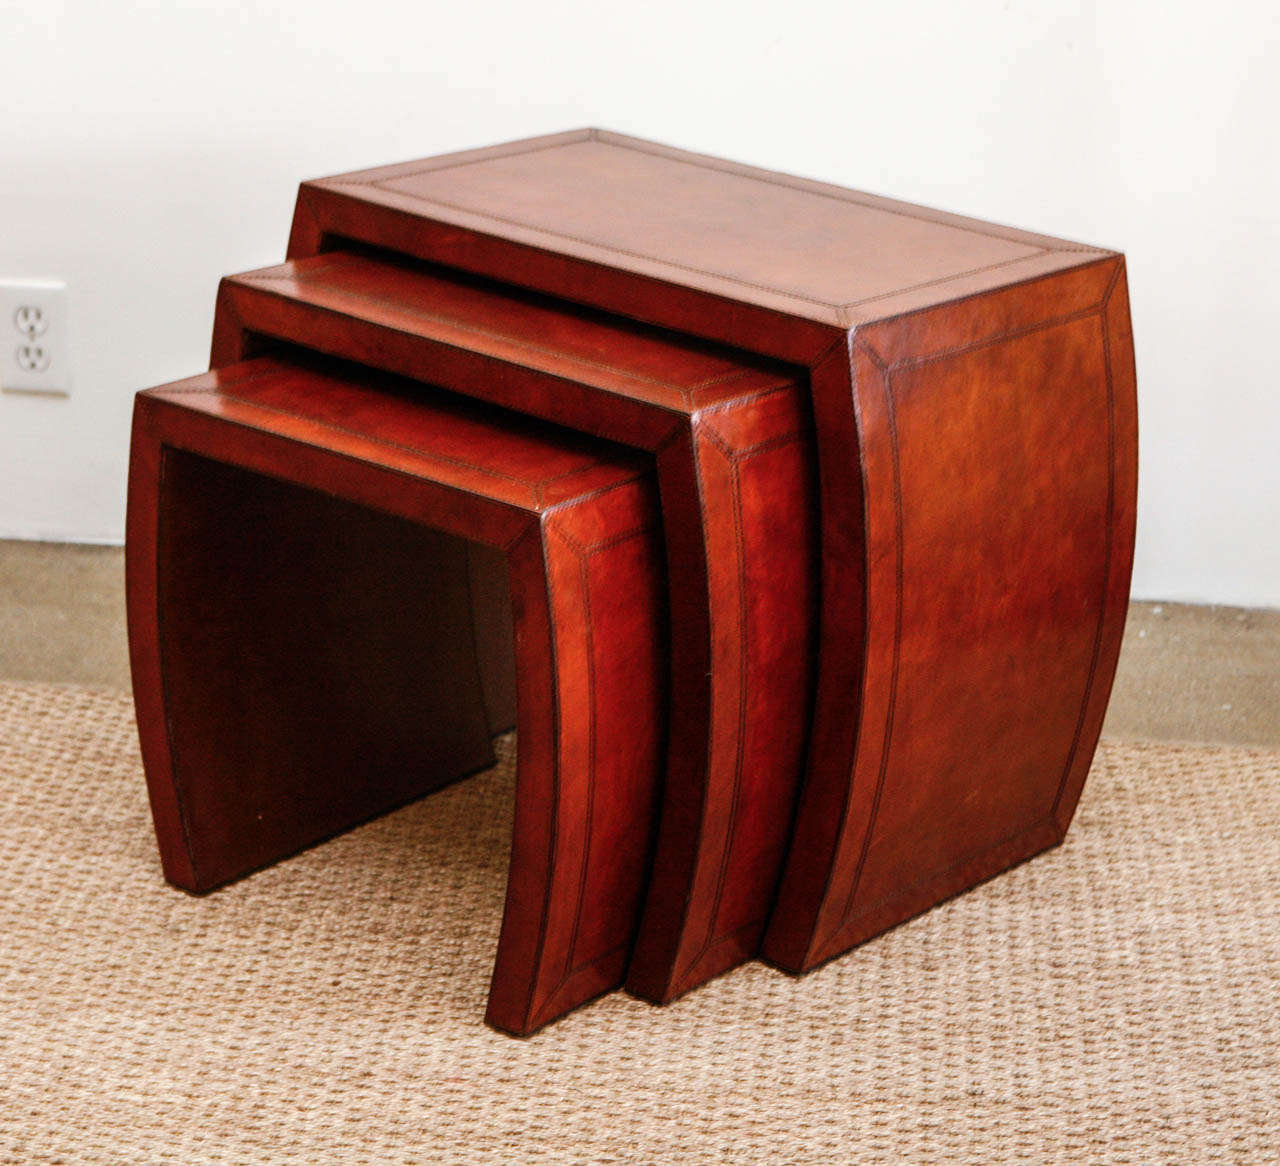 In a gorgeous cognac leather, this set of three nesting tables with contrast stitching are distinctive and sophisticated. They're lovely as a trio, of course, but work equally well when split apart to be used individually. The sides are slightly